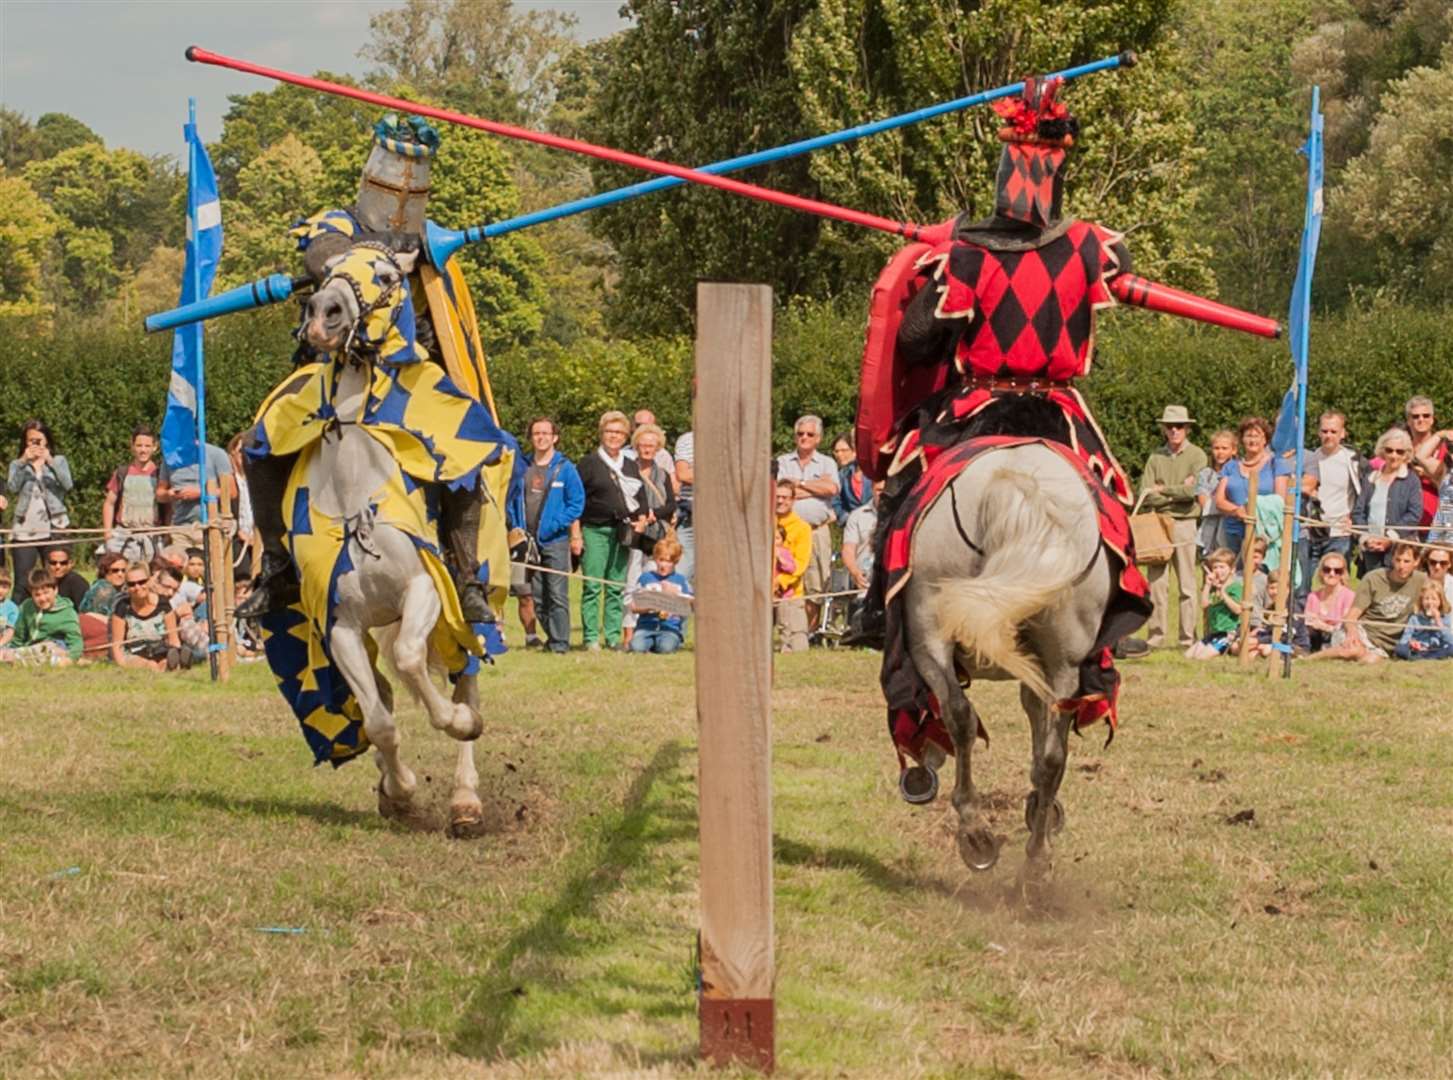 Jousting tournaments will be taking place at Hever Castle